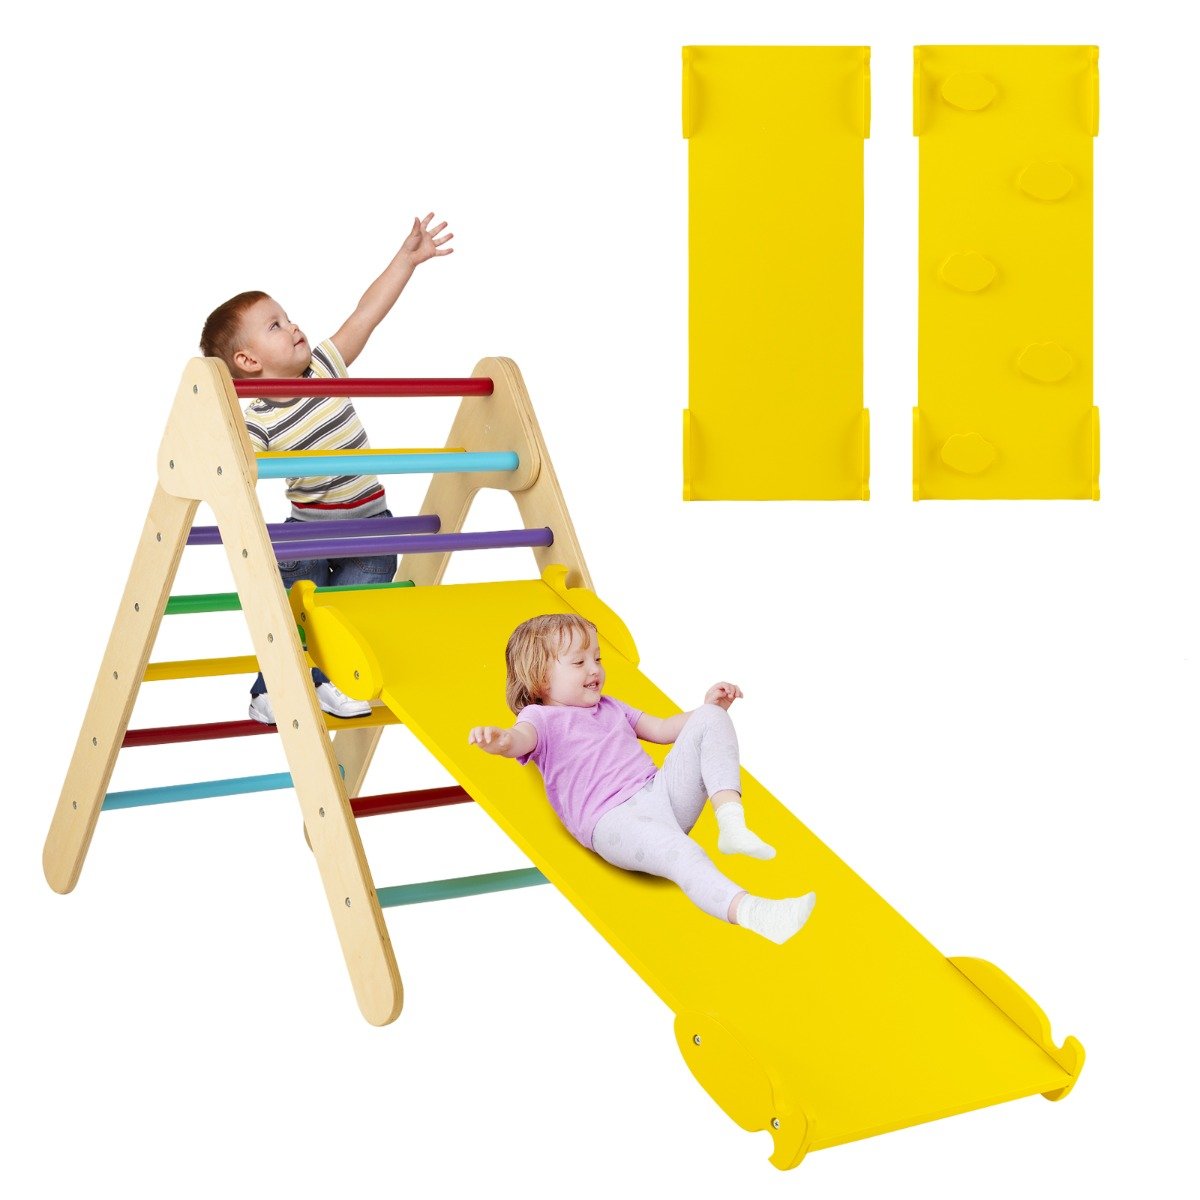 Kid's Wooden Climbing Triangle Set - Slide, Climb, and Reversible Ramp